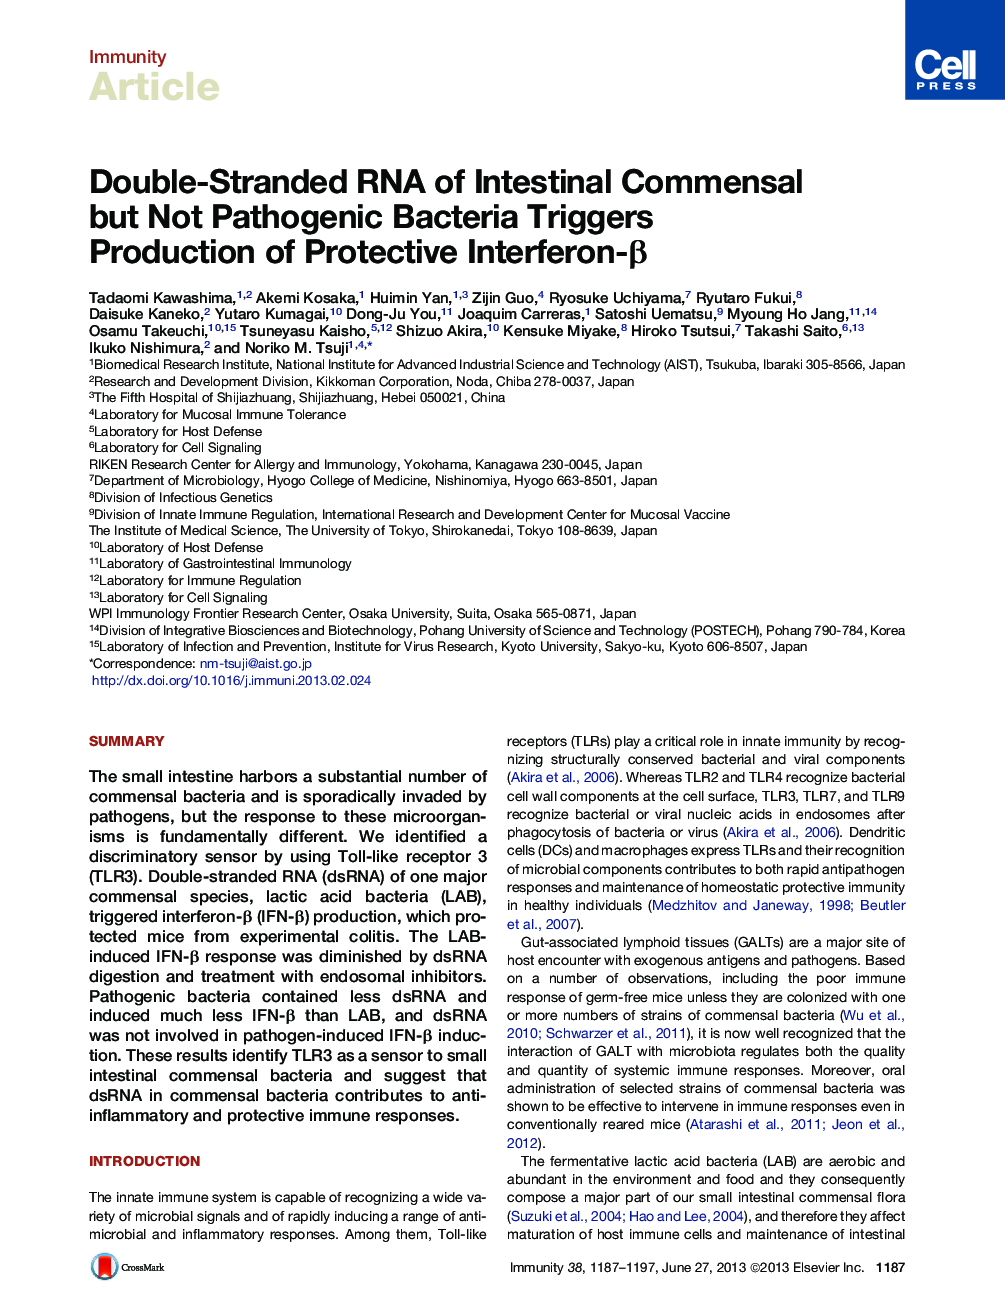 Double-Stranded RNA of Intestinal Commensal but Not Pathogenic Bacteria Triggers Production of Protective Interferon-β